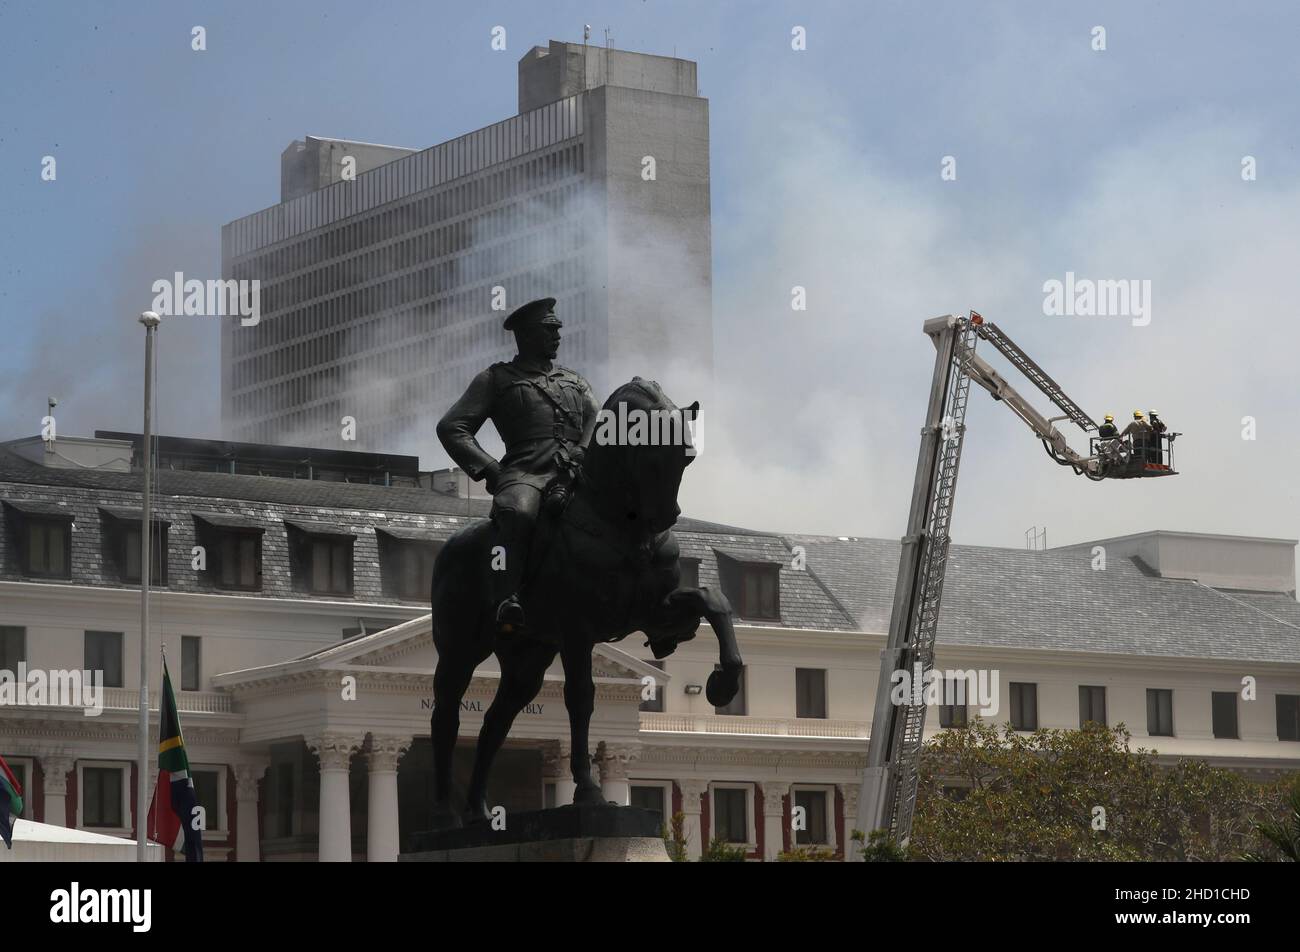 The statue of Louis Botha, former prime minister of the union of South Africa, is seen in front of the parliament where a fire broke out in Cape Town, South Africa, January 2, 2022. REUTERS/Mike Hutchings Stock Photo